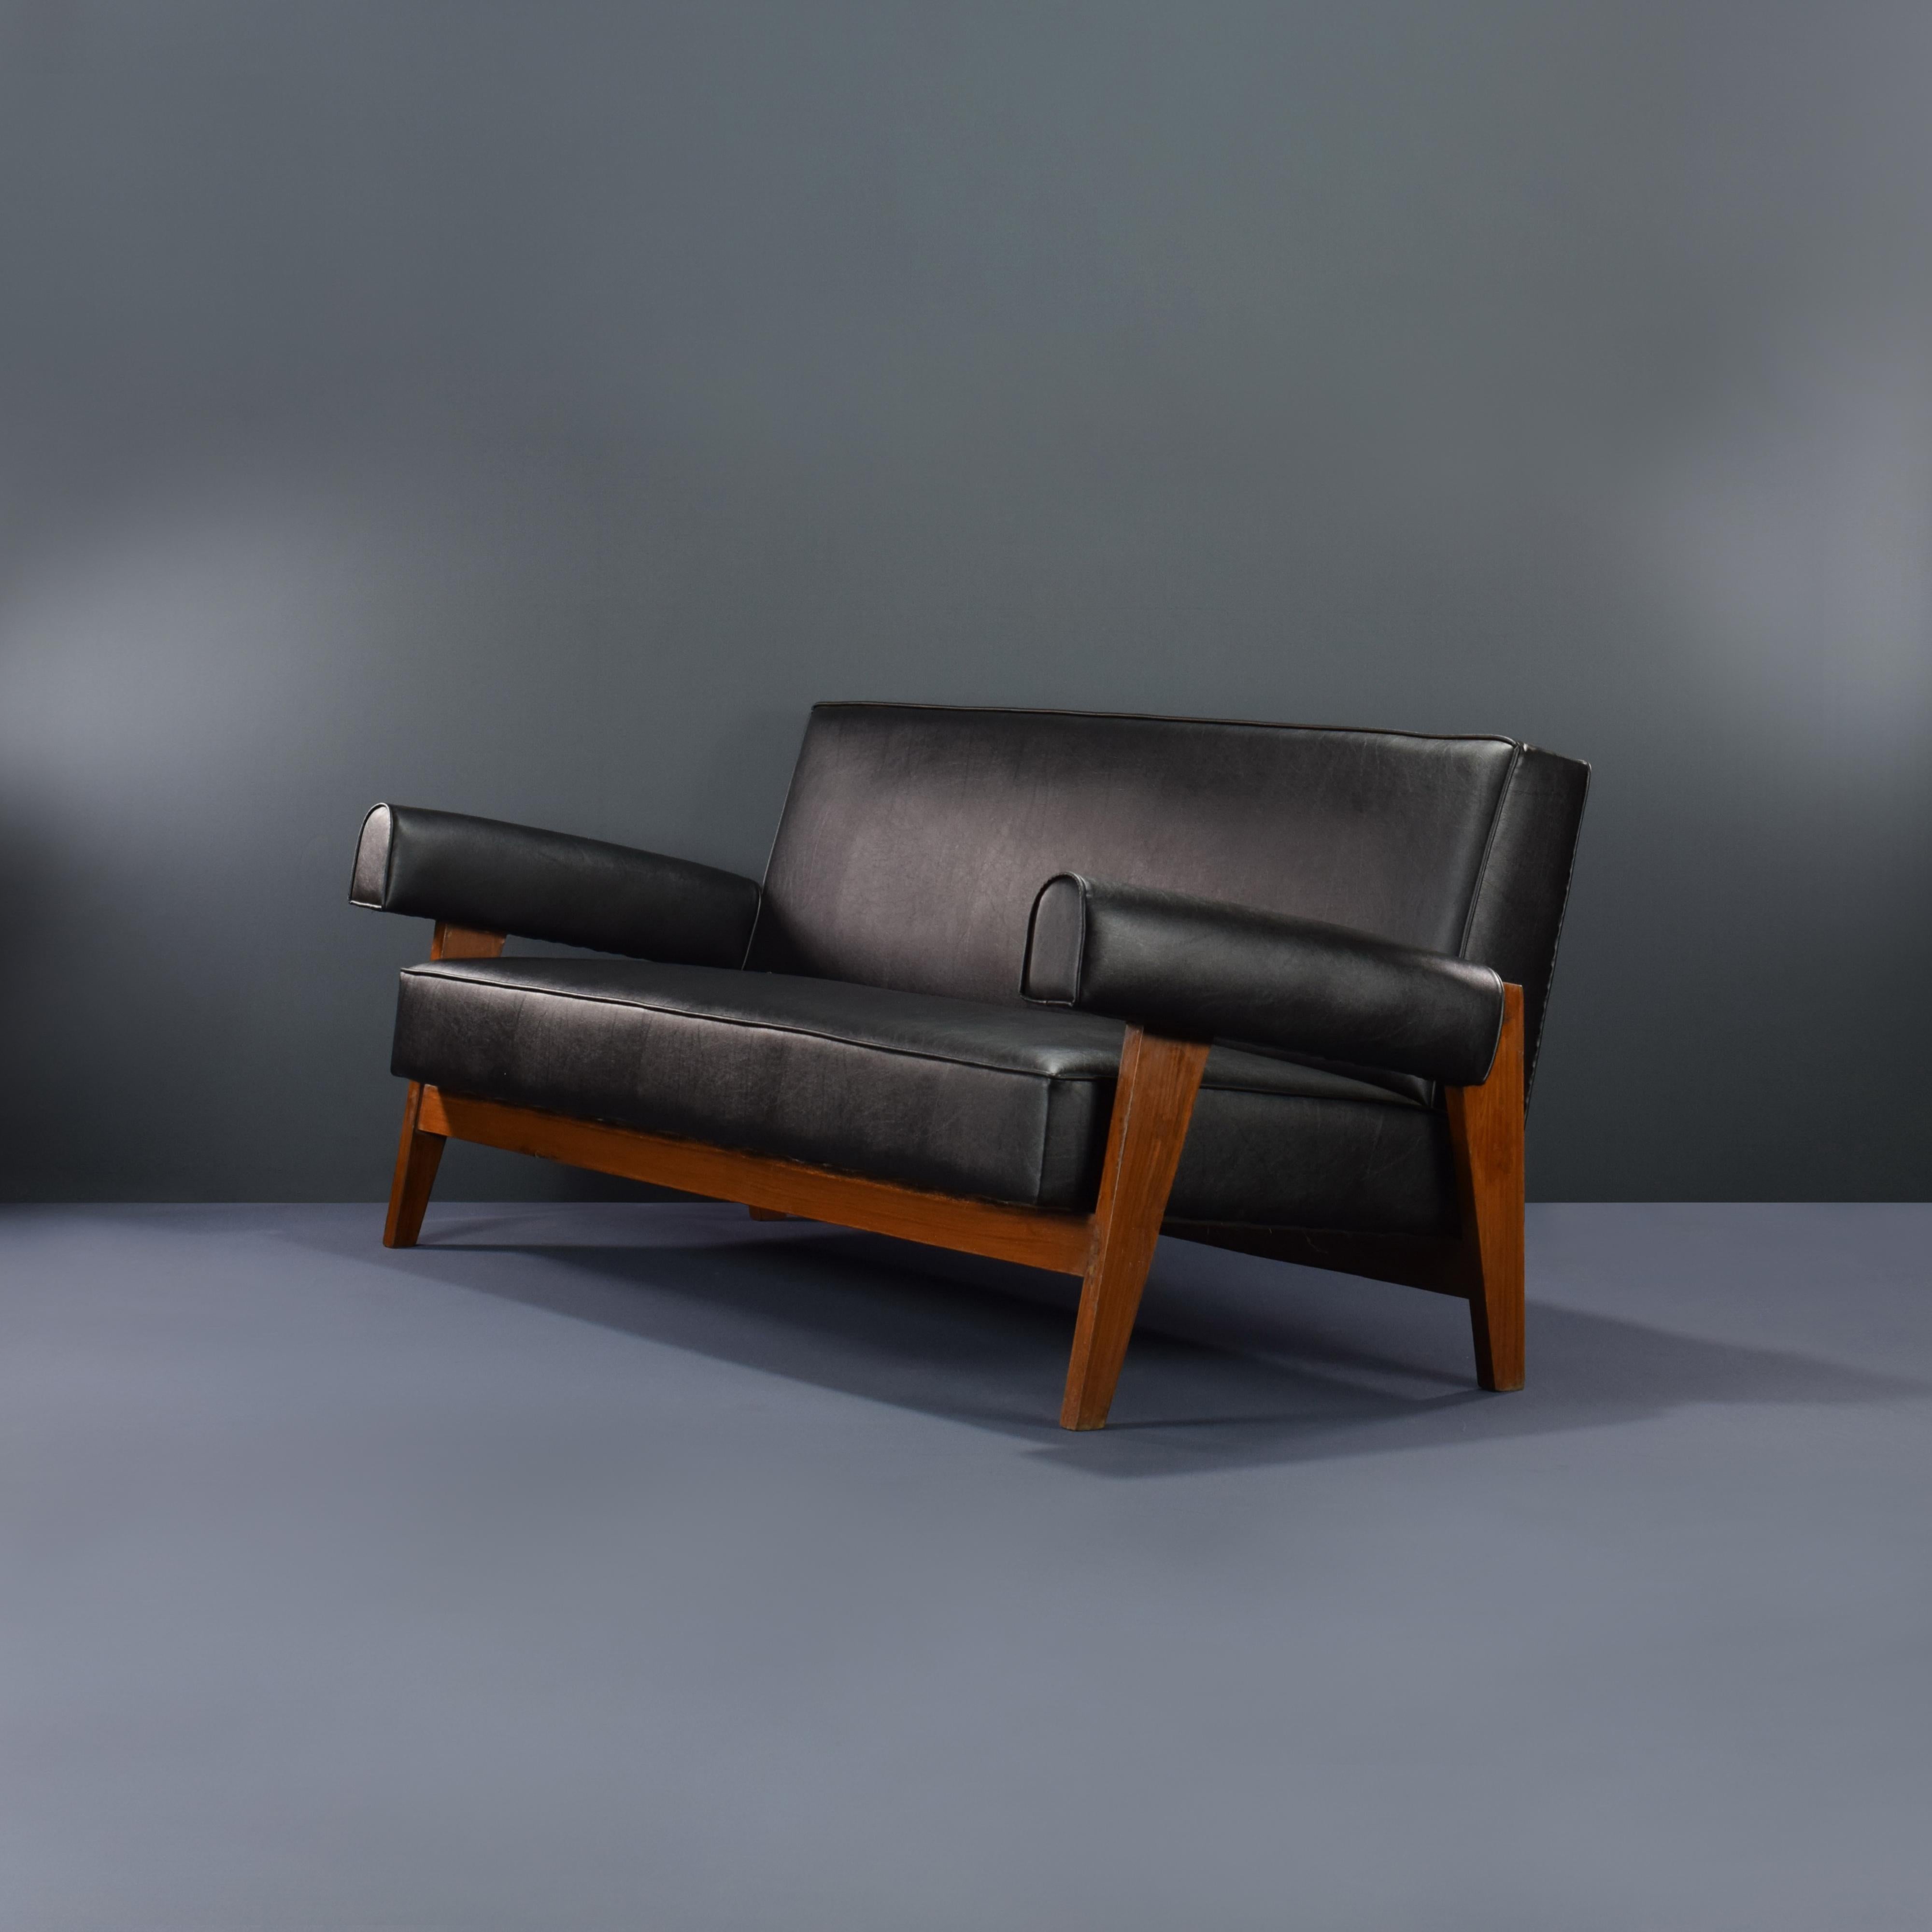 This sofa is a fantastic piece, finally it's iconic. It is raw in its simplicity, nothing too much but still nothing is missing. The legs in a shape of a bridge gave them the name 